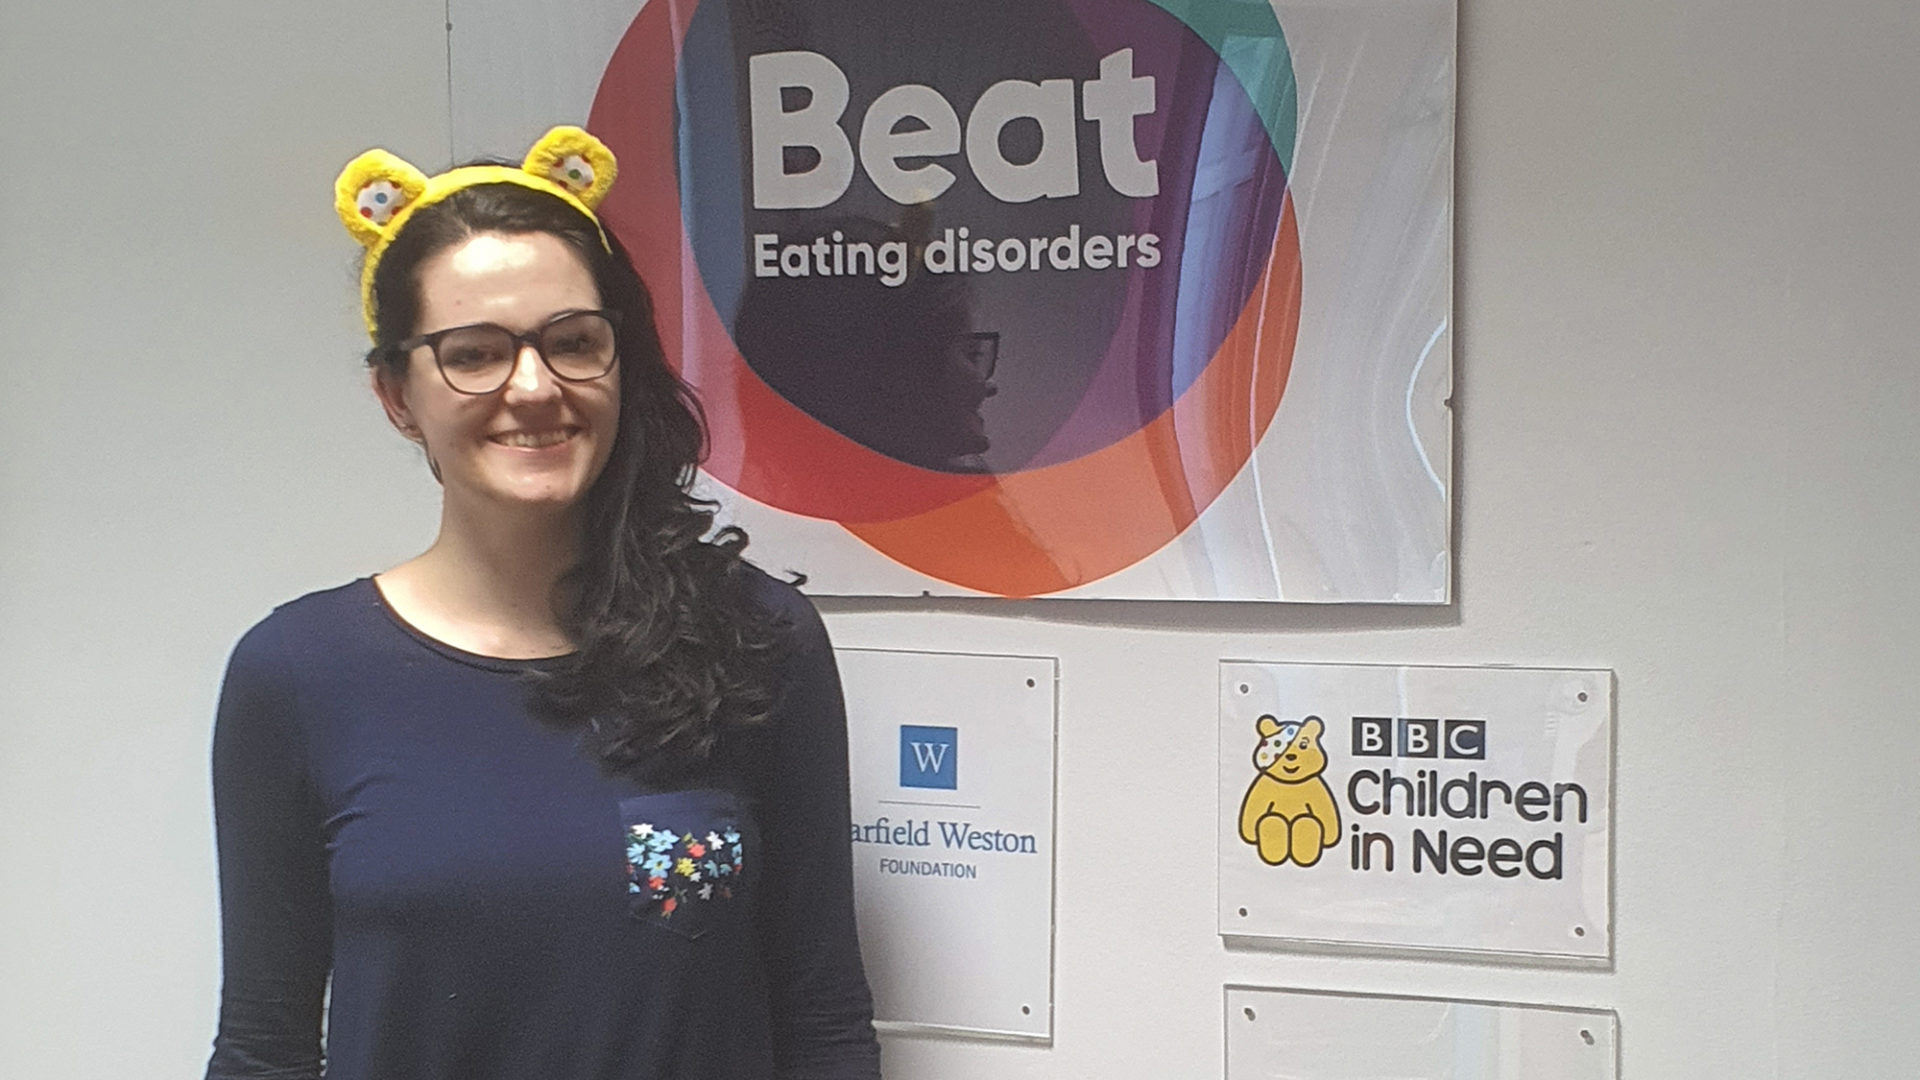 A photo of Tash wearing Pudsey ears and standing in front of the Beat sign